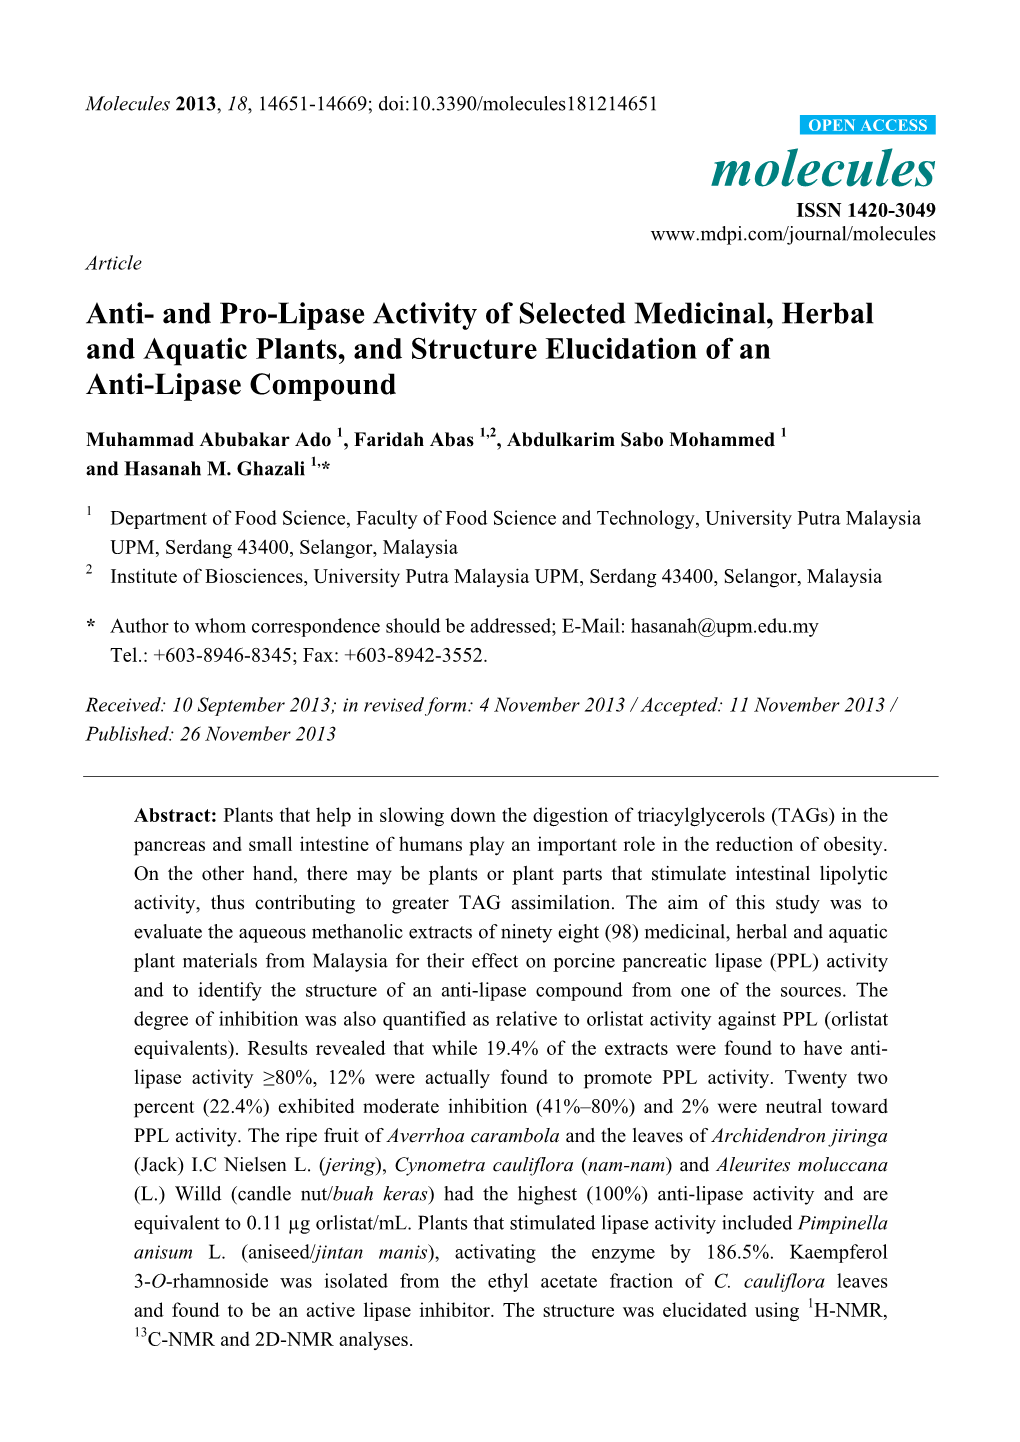 Anti- and Pro-Lipase Activity of Selected Medicinal, Herbal and Aquatic Plants, and Structure Elucidation of an Anti-Lipase Compound